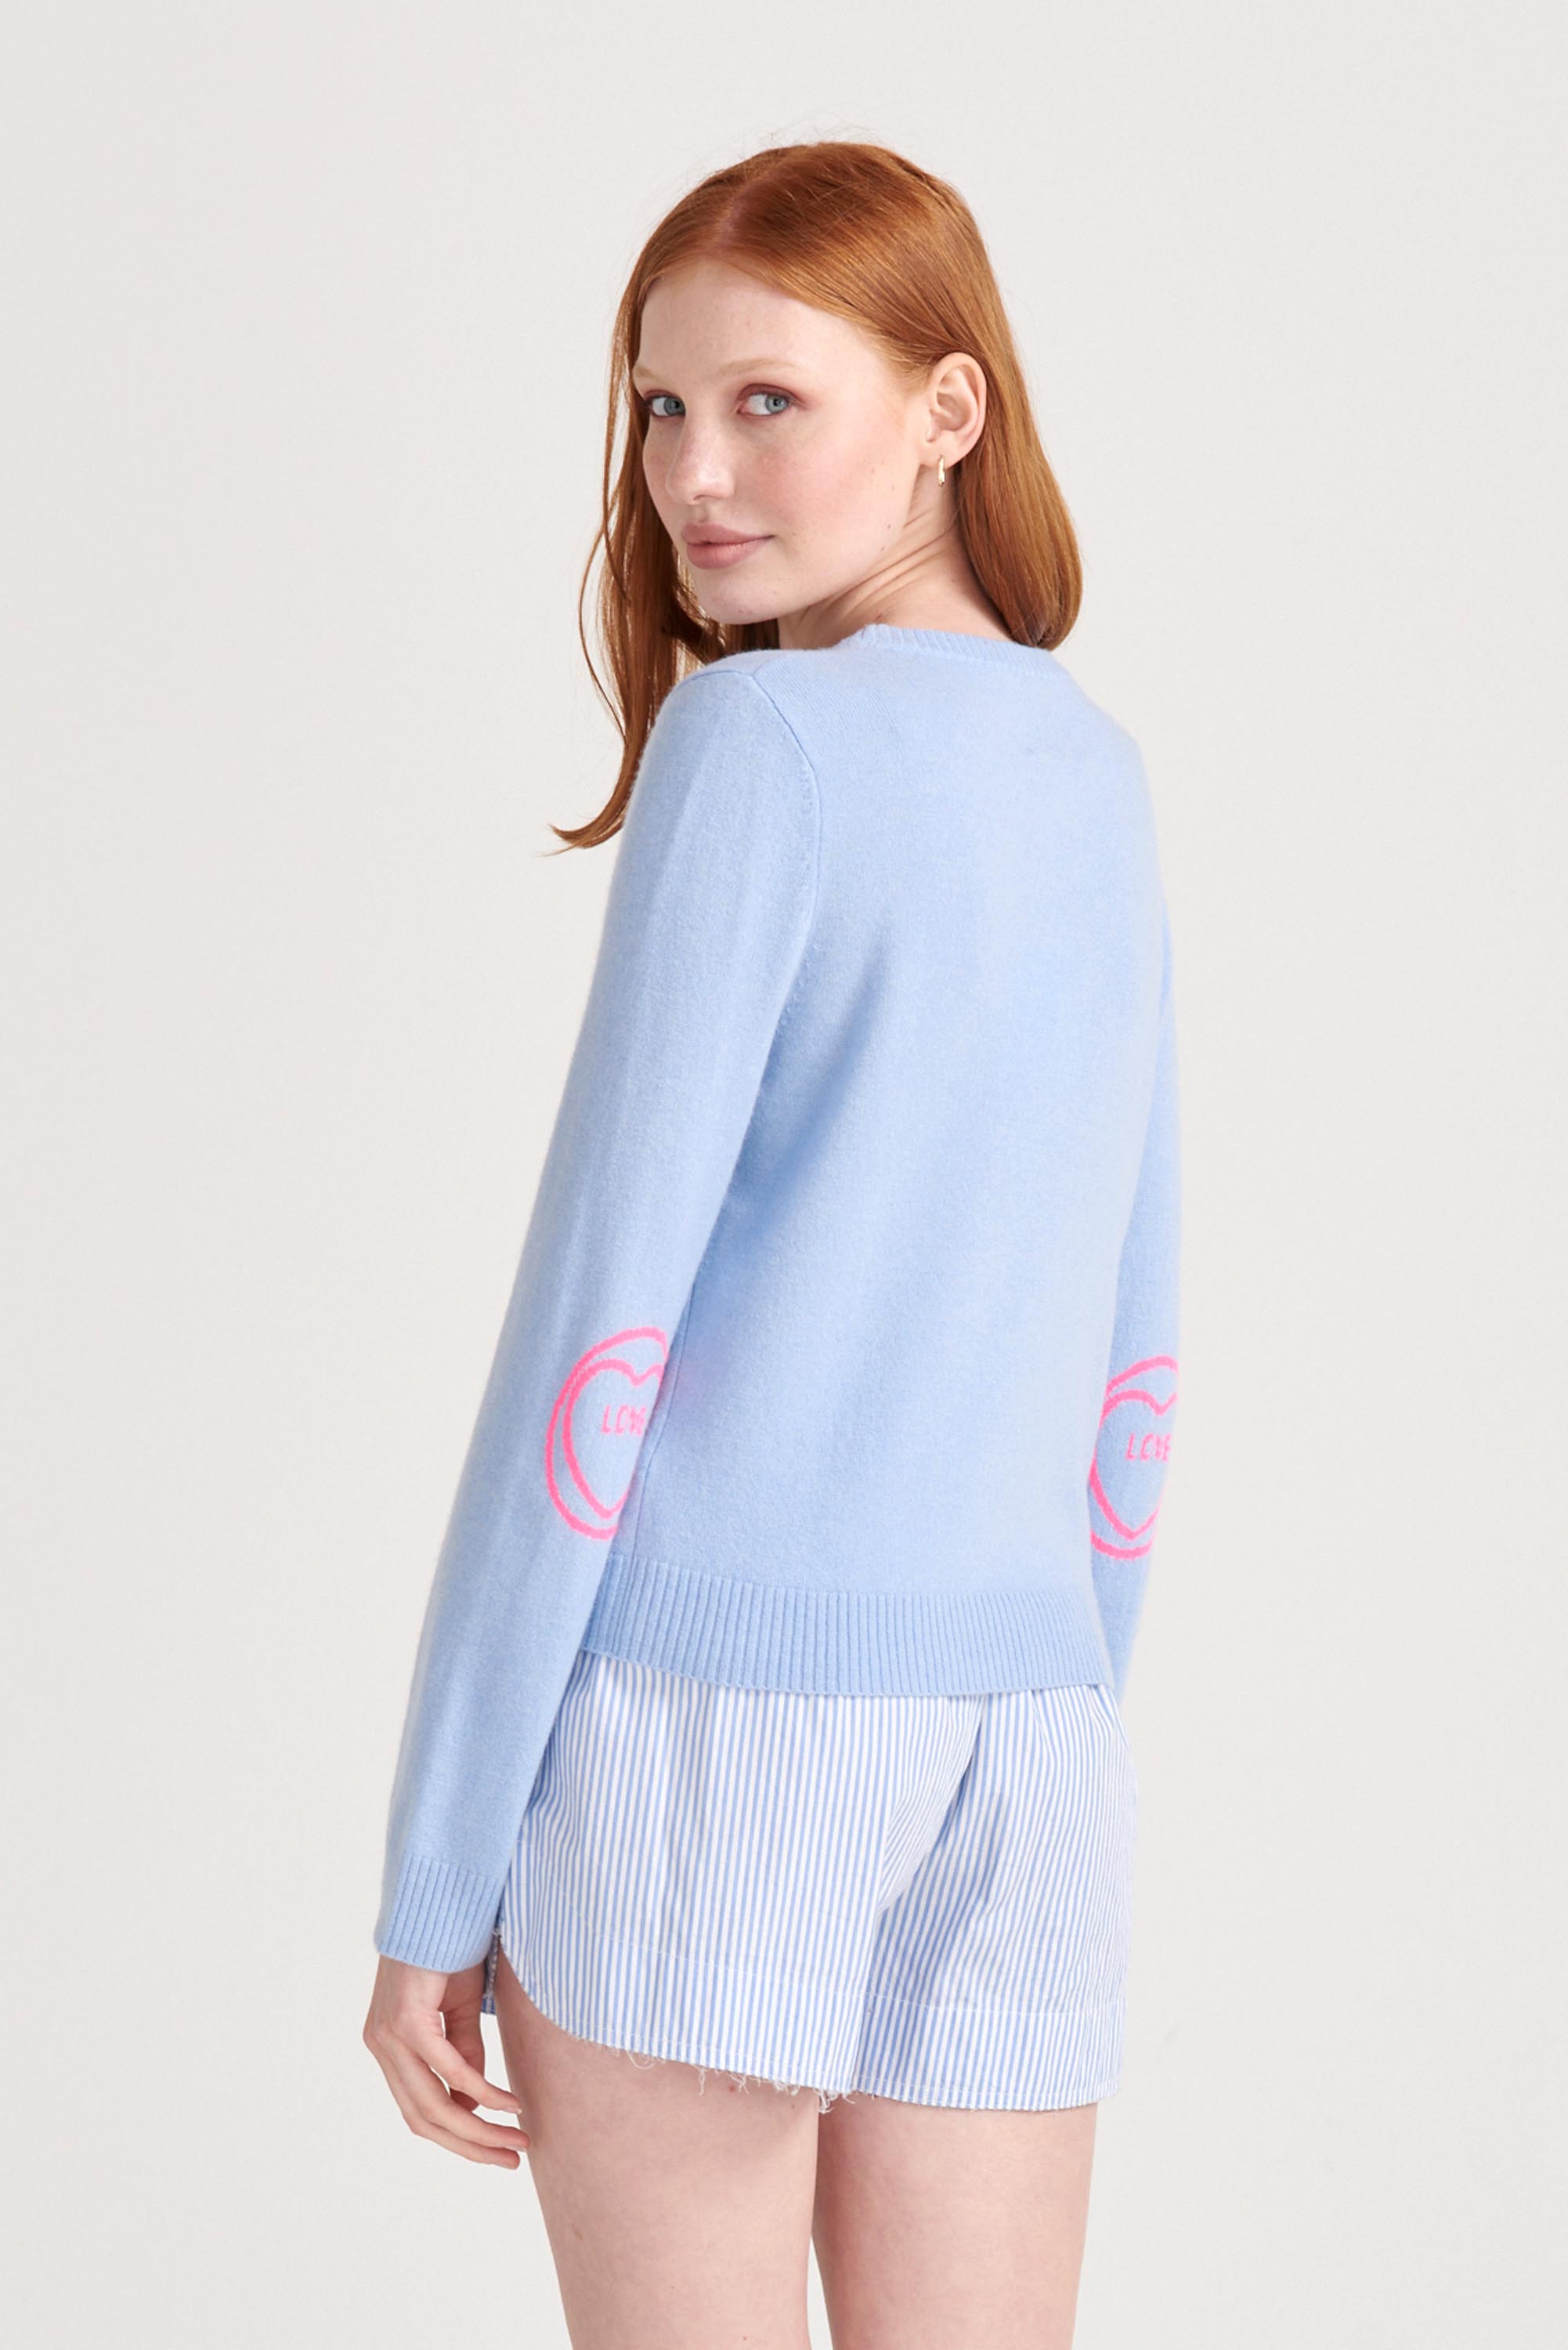 Red haired female model wearing Jumper1234 Pale blue cashmere crew neck jumper with neon pink love heart intarsia elbow patches facing away from the camera